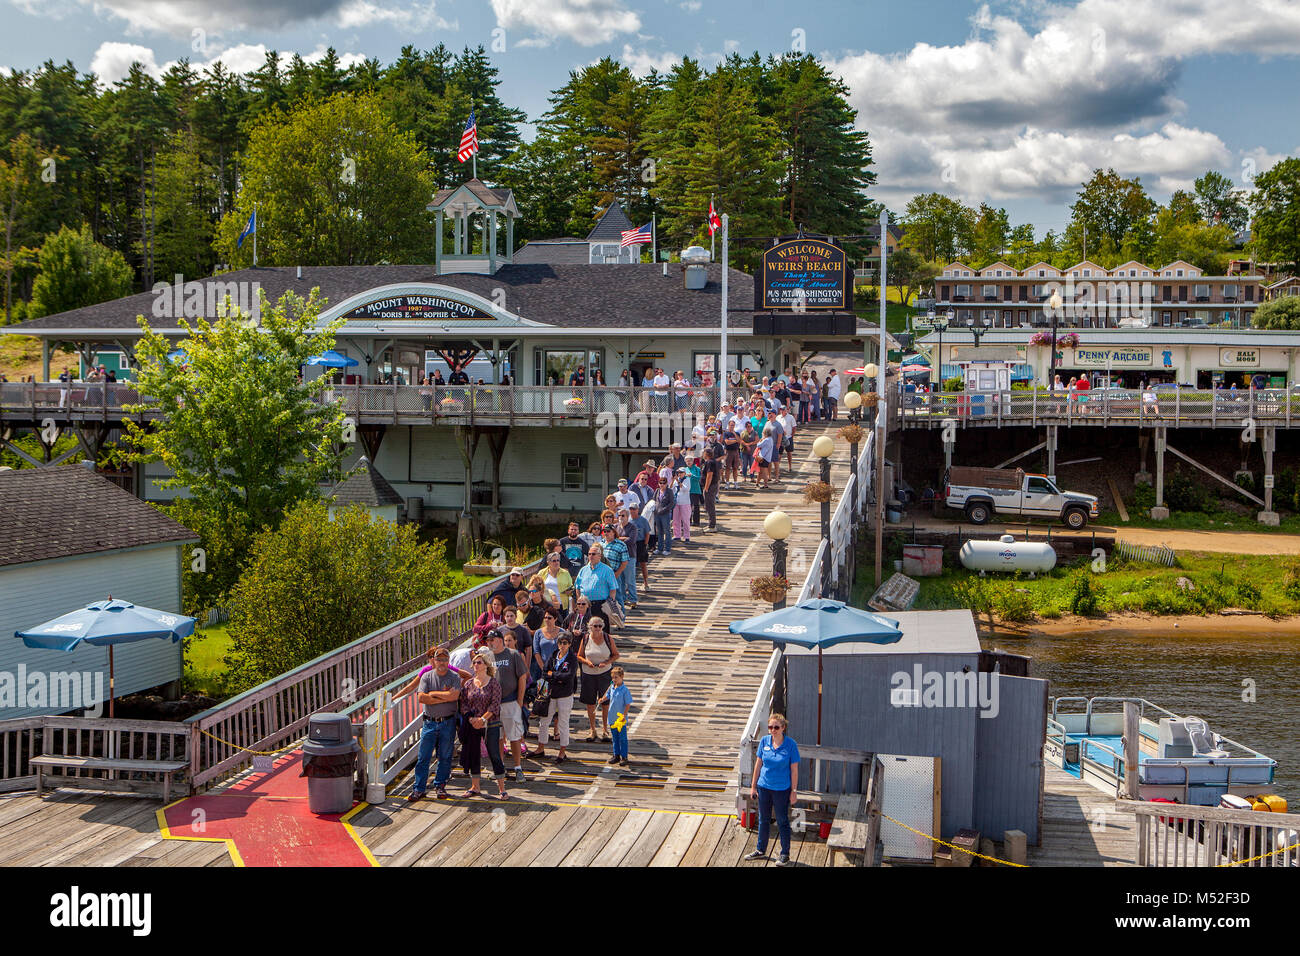 Tourists wait on the dock to ride the Mount Washington Scenic Ferry from Wiers Beach to Wolfboro, NH, USA. Stock Photo